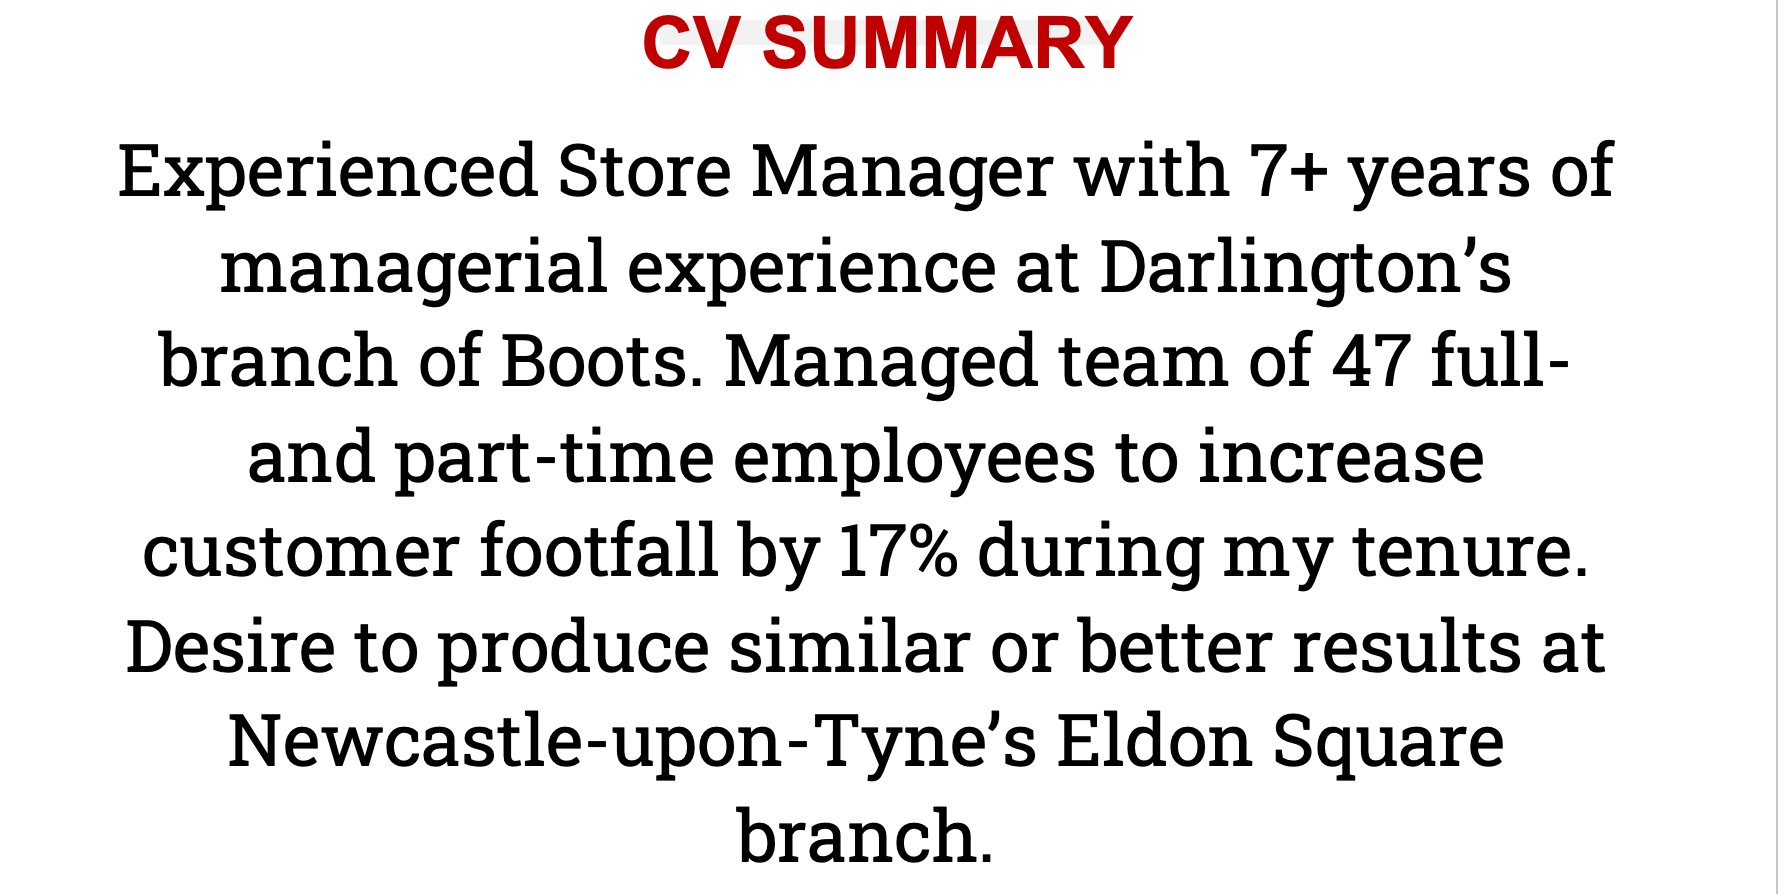 A professional summary for retail with a red CV summary title.